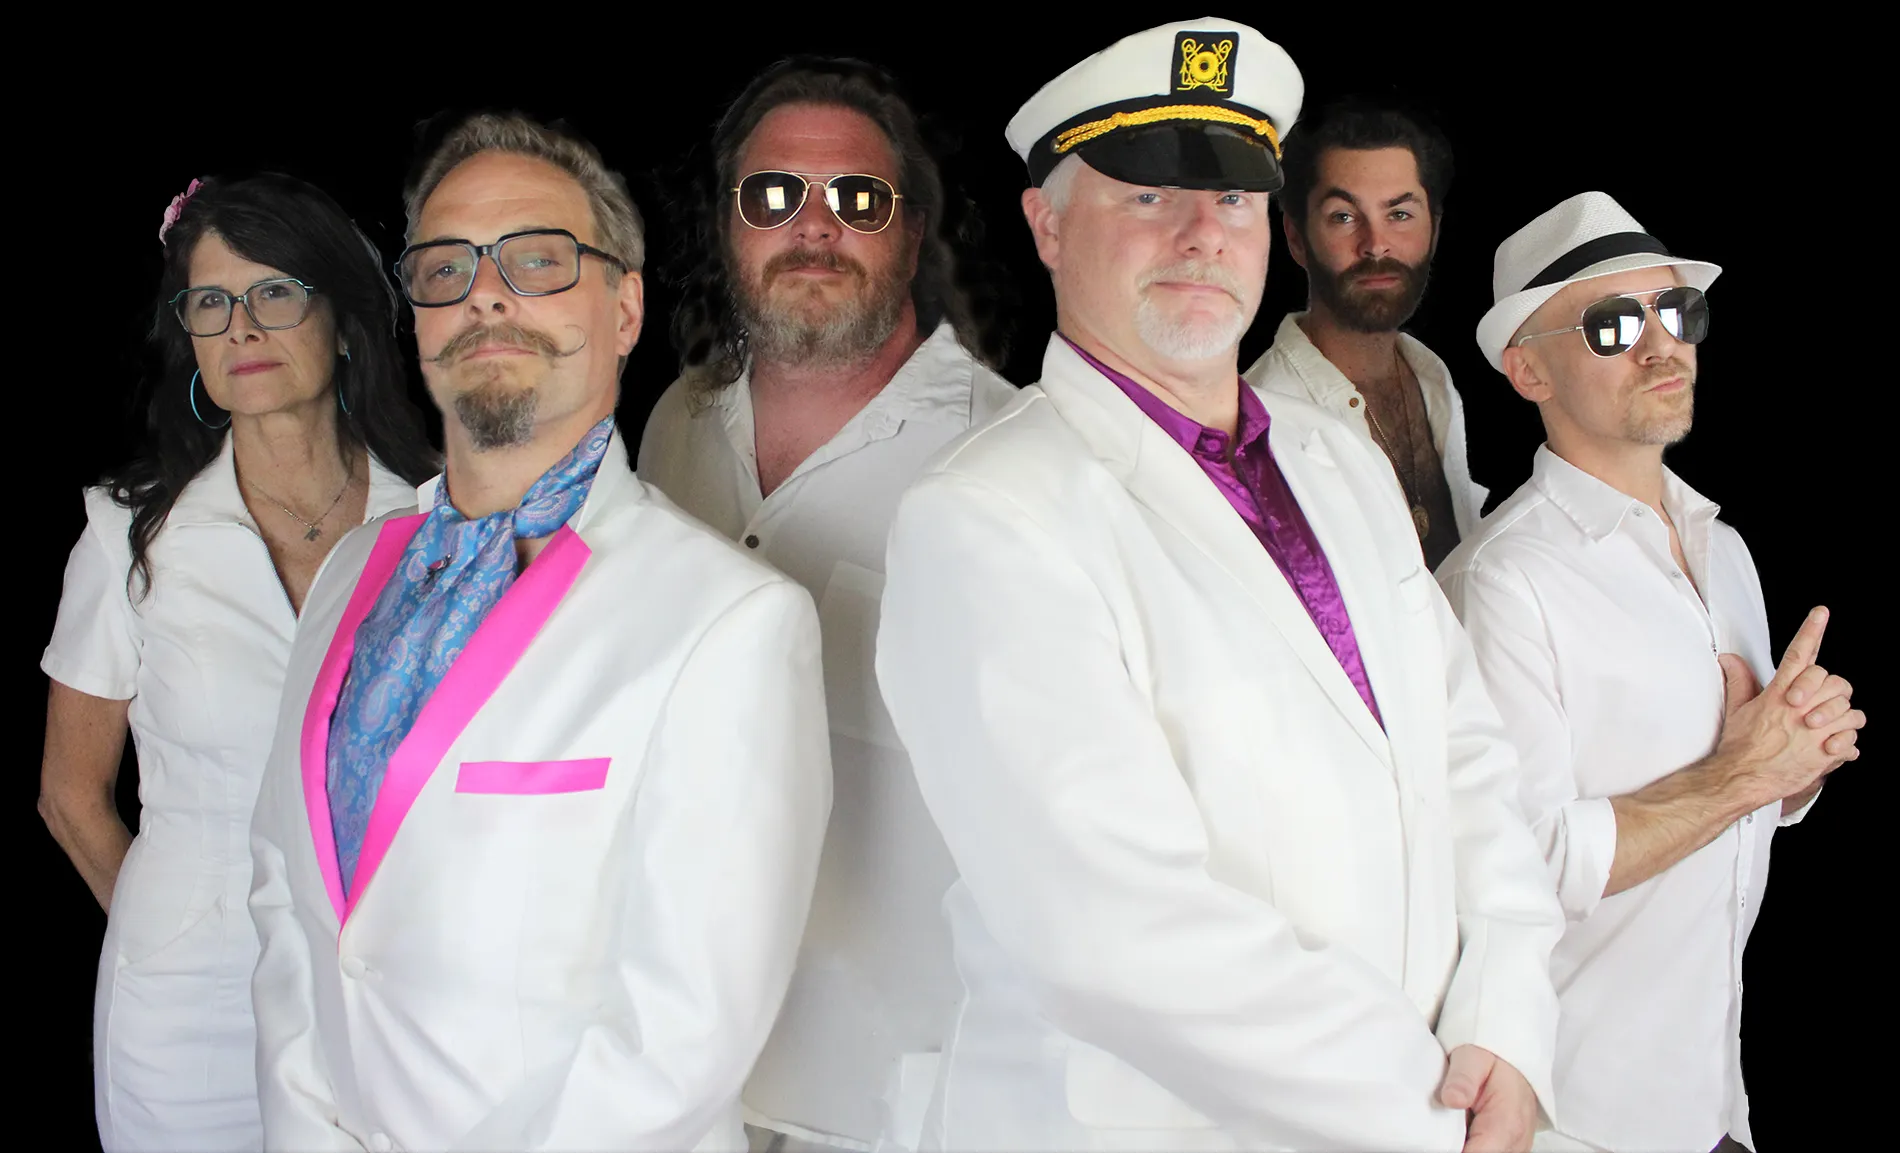 Thurston Howell yacht rock band members